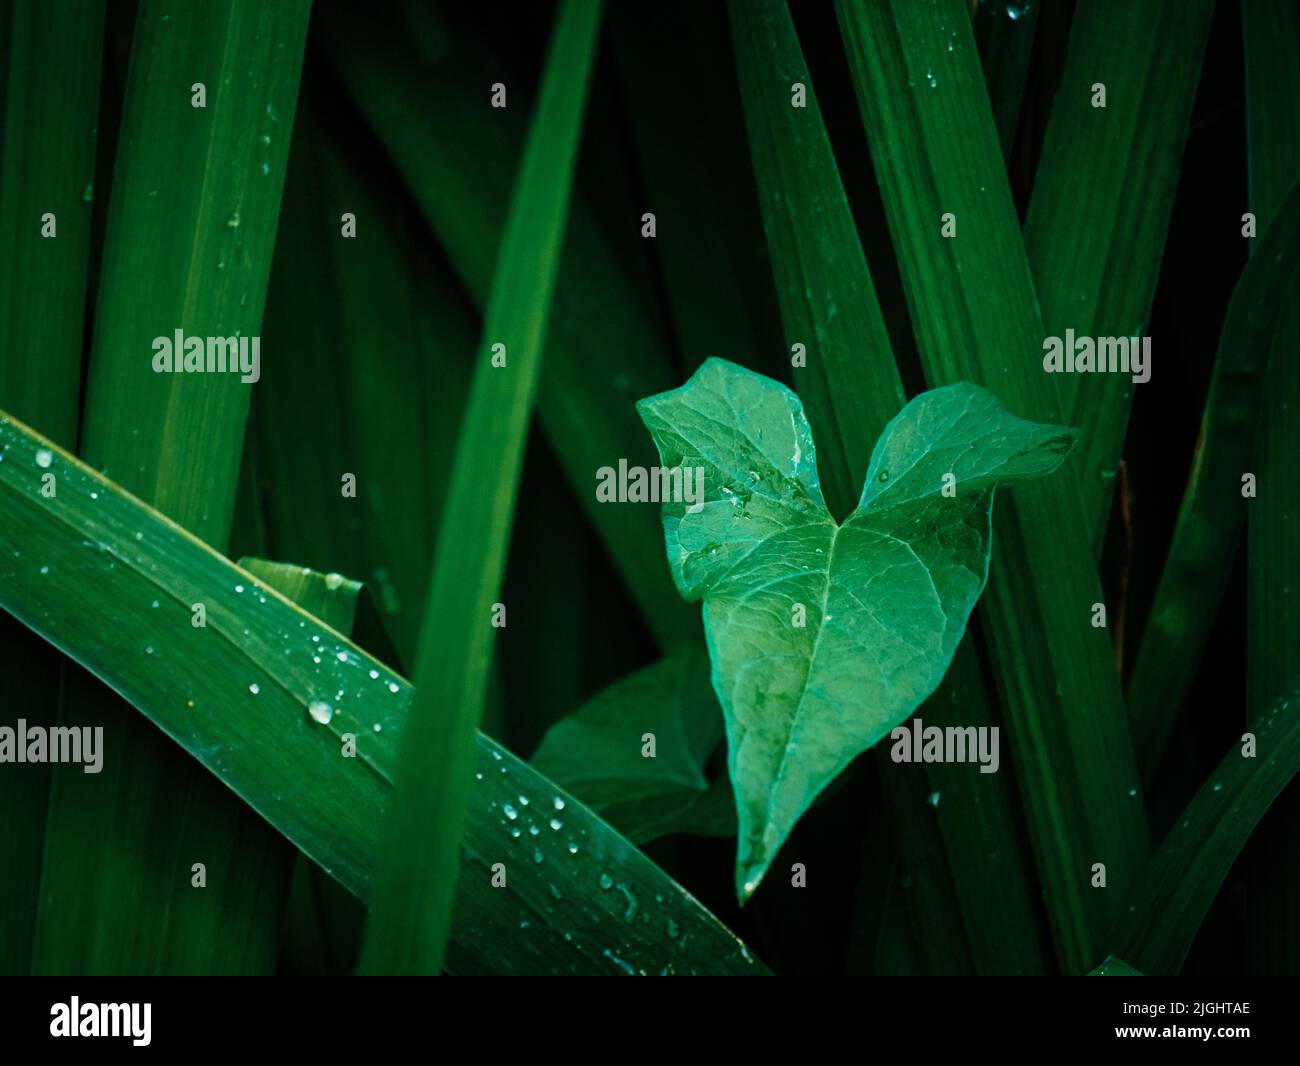 Bind weed, convolvulus leaf amongst green gladioli leaves with dew drops Stock Photo